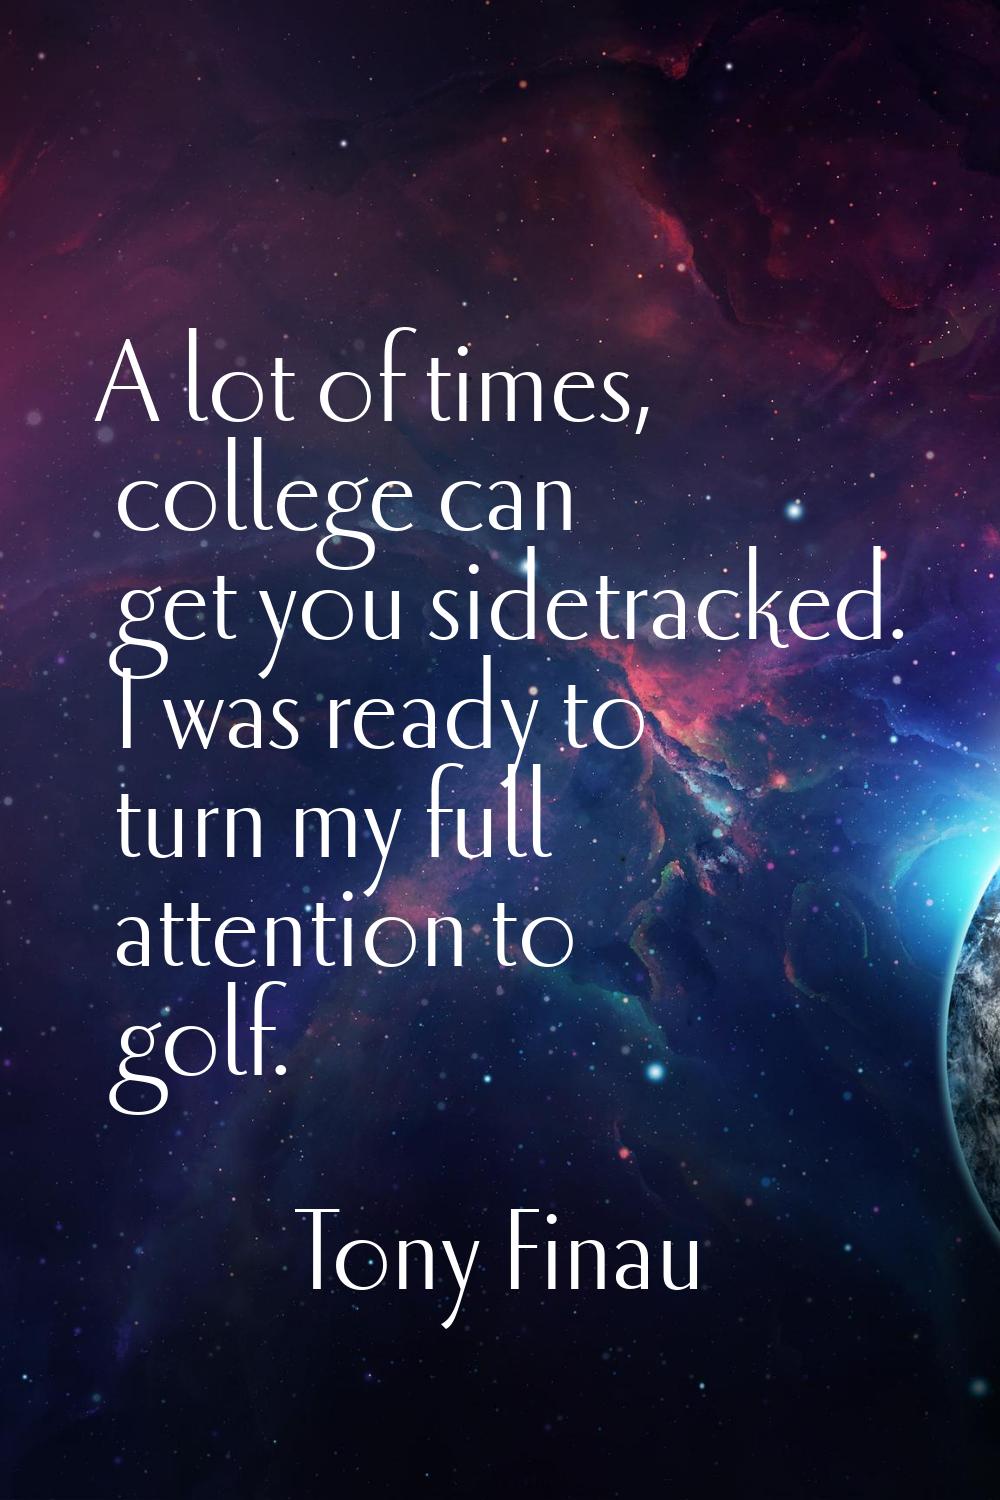 A lot of times, college can get you sidetracked. I was ready to turn my full attention to golf.